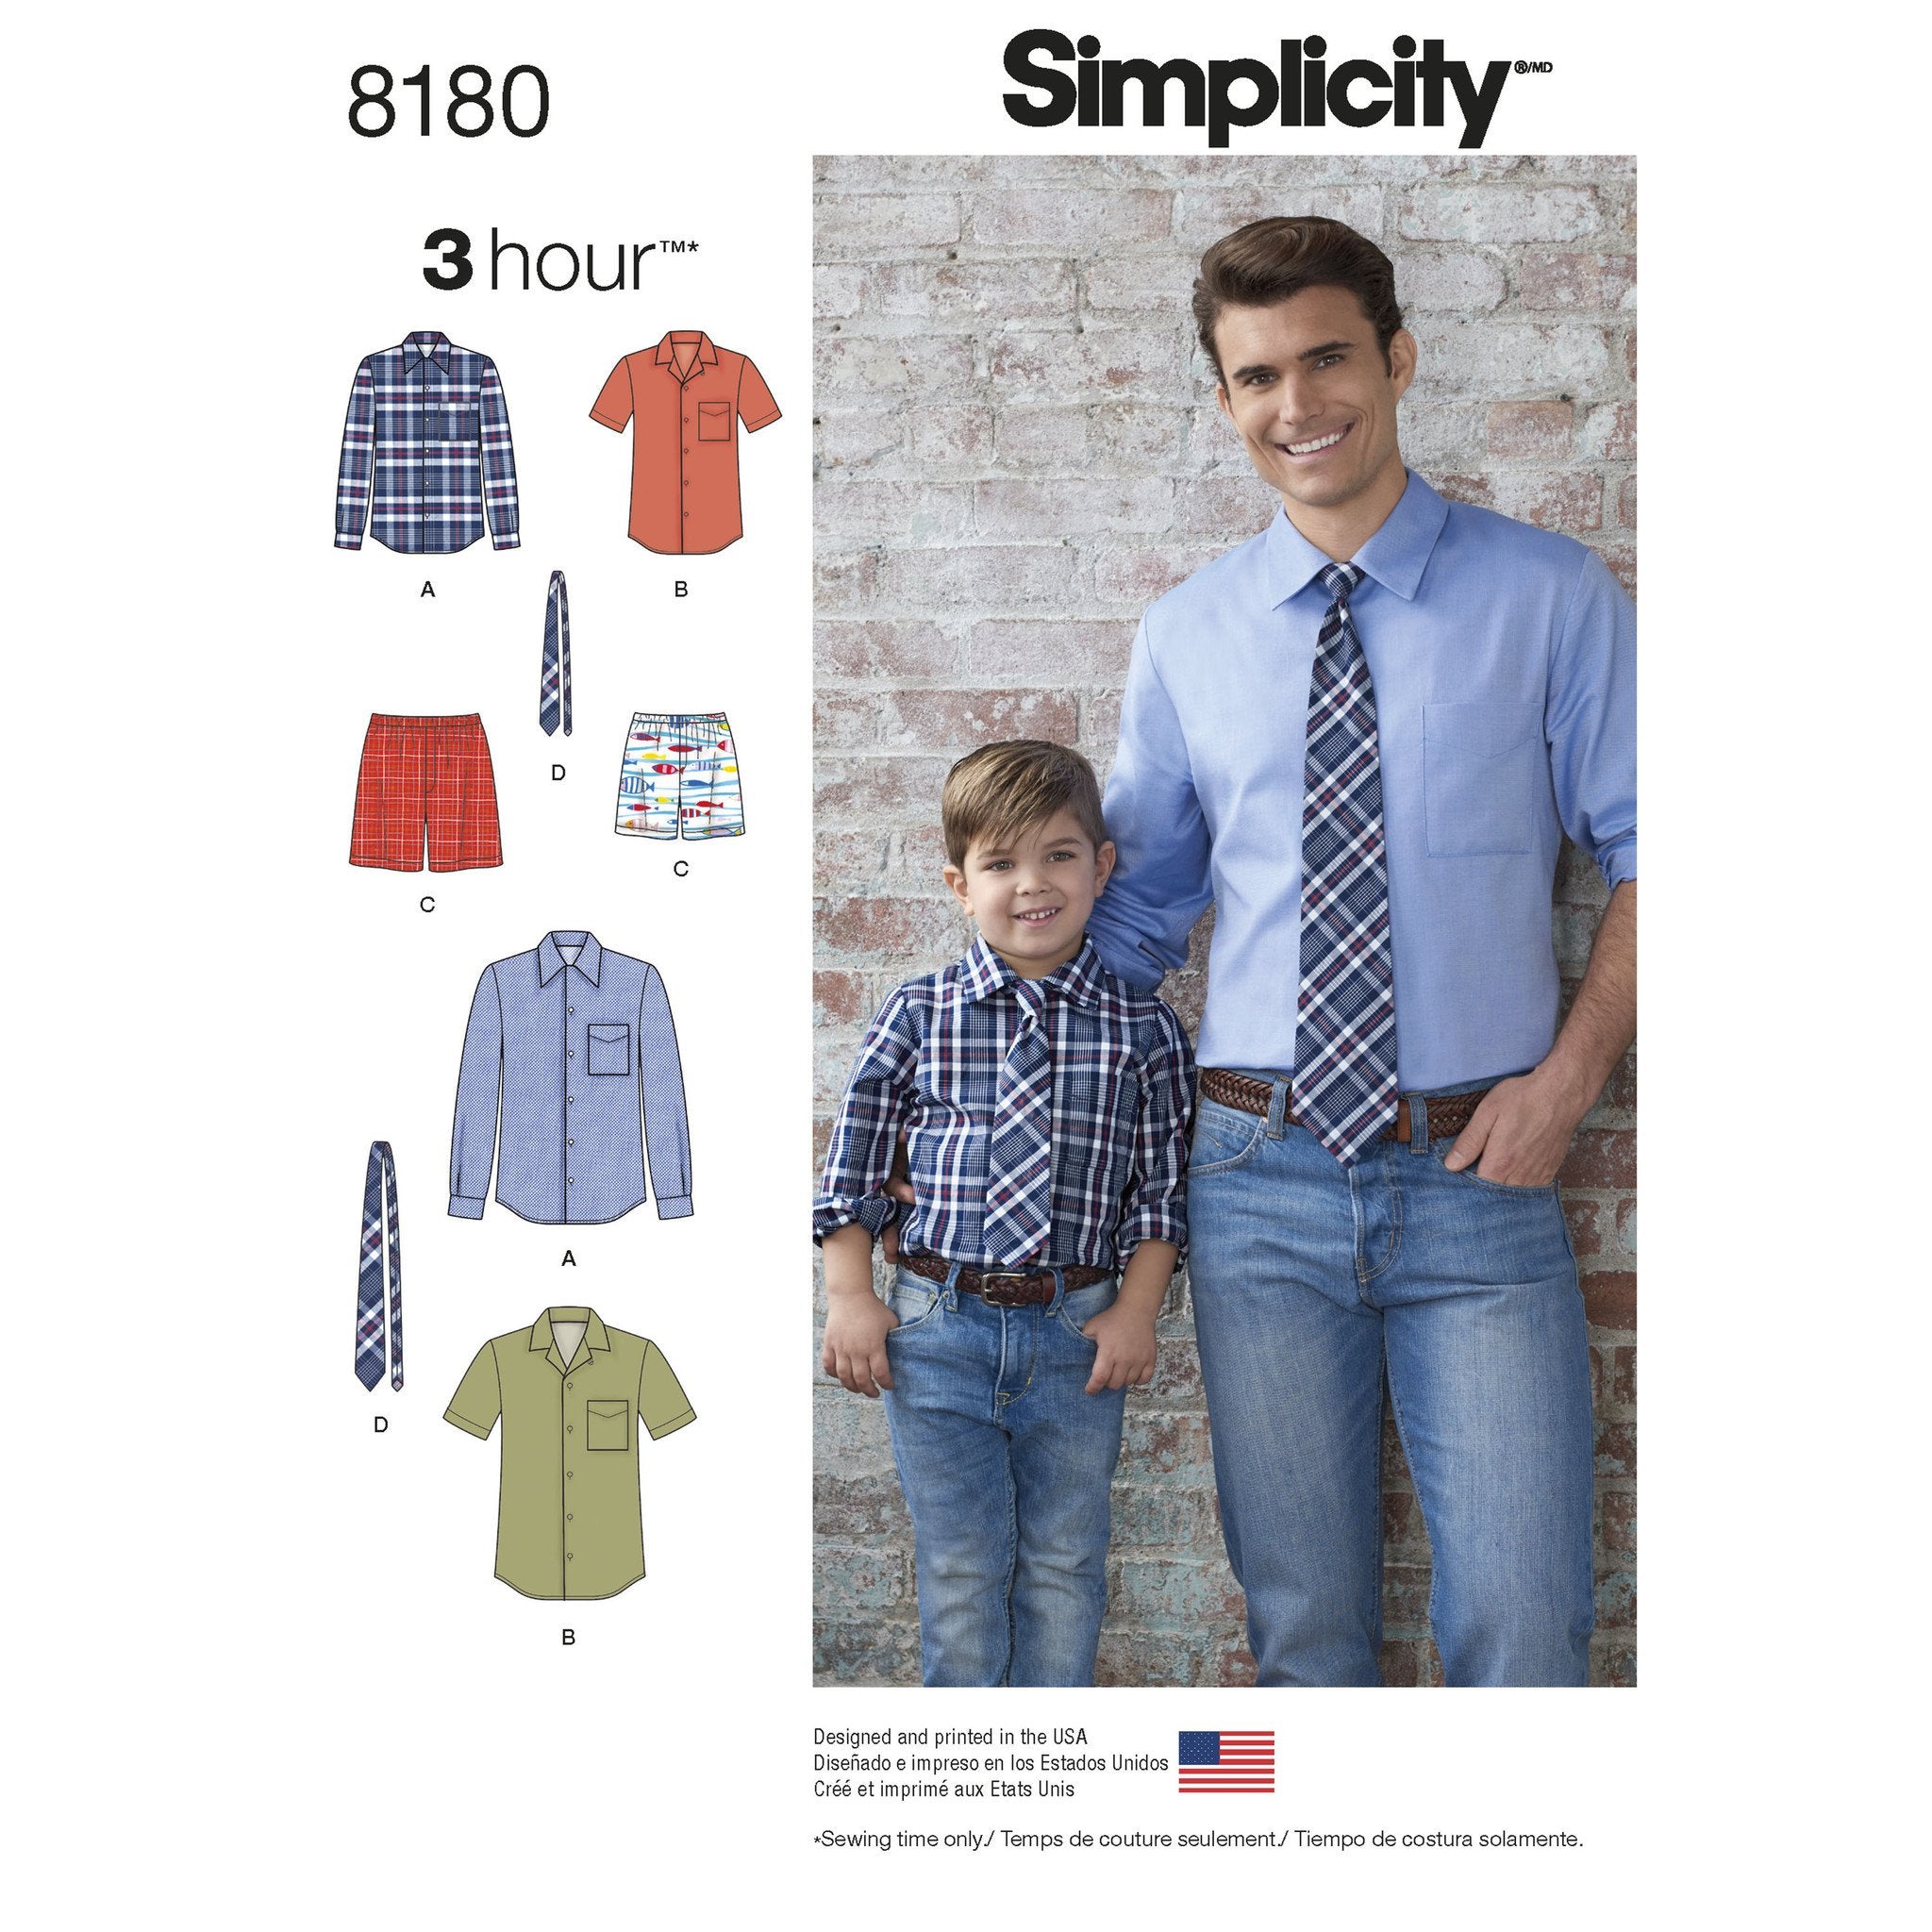 Simplicity 8180 boys / mens shirt pattern from Jaycotts Sewing Supplies